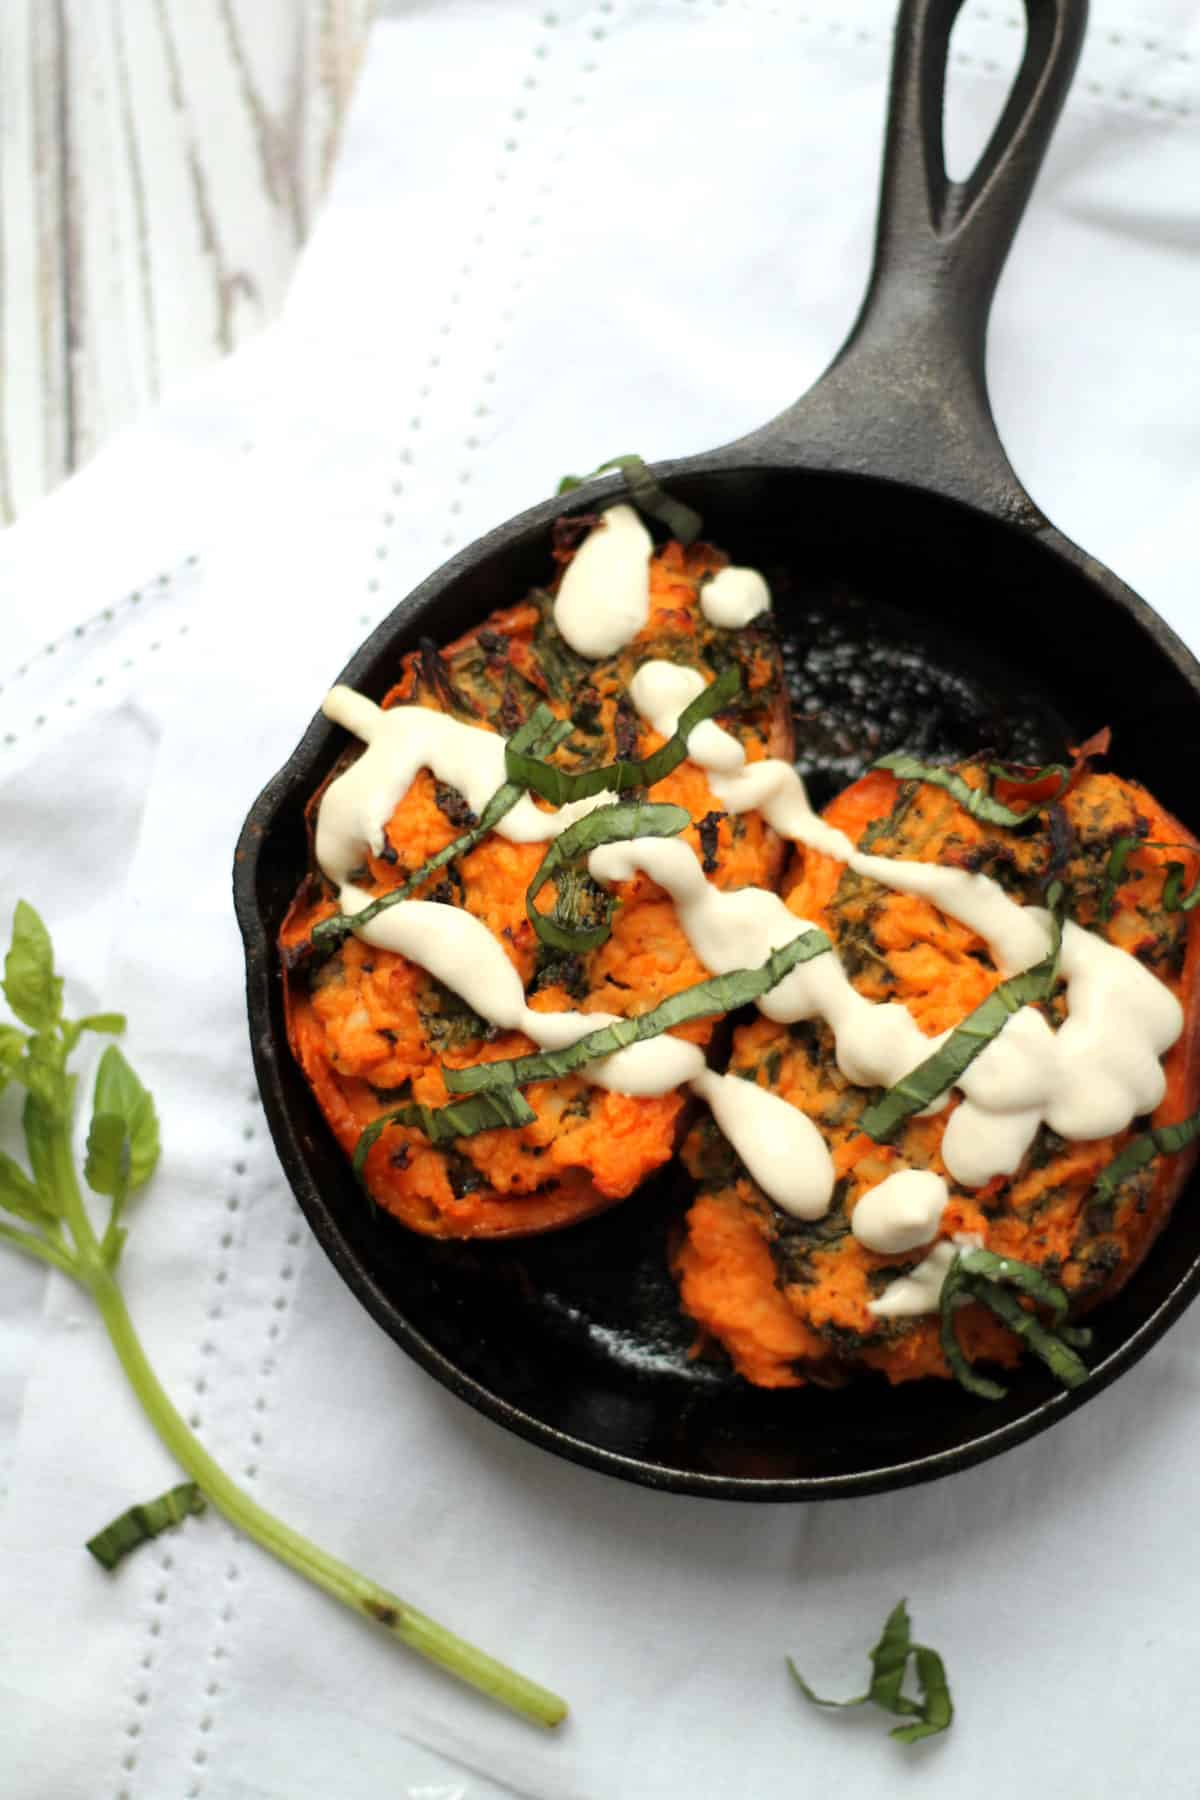 Overhead view of stuffed sweet potatoes with goat cheese and kale placed on an iron skillet pan.